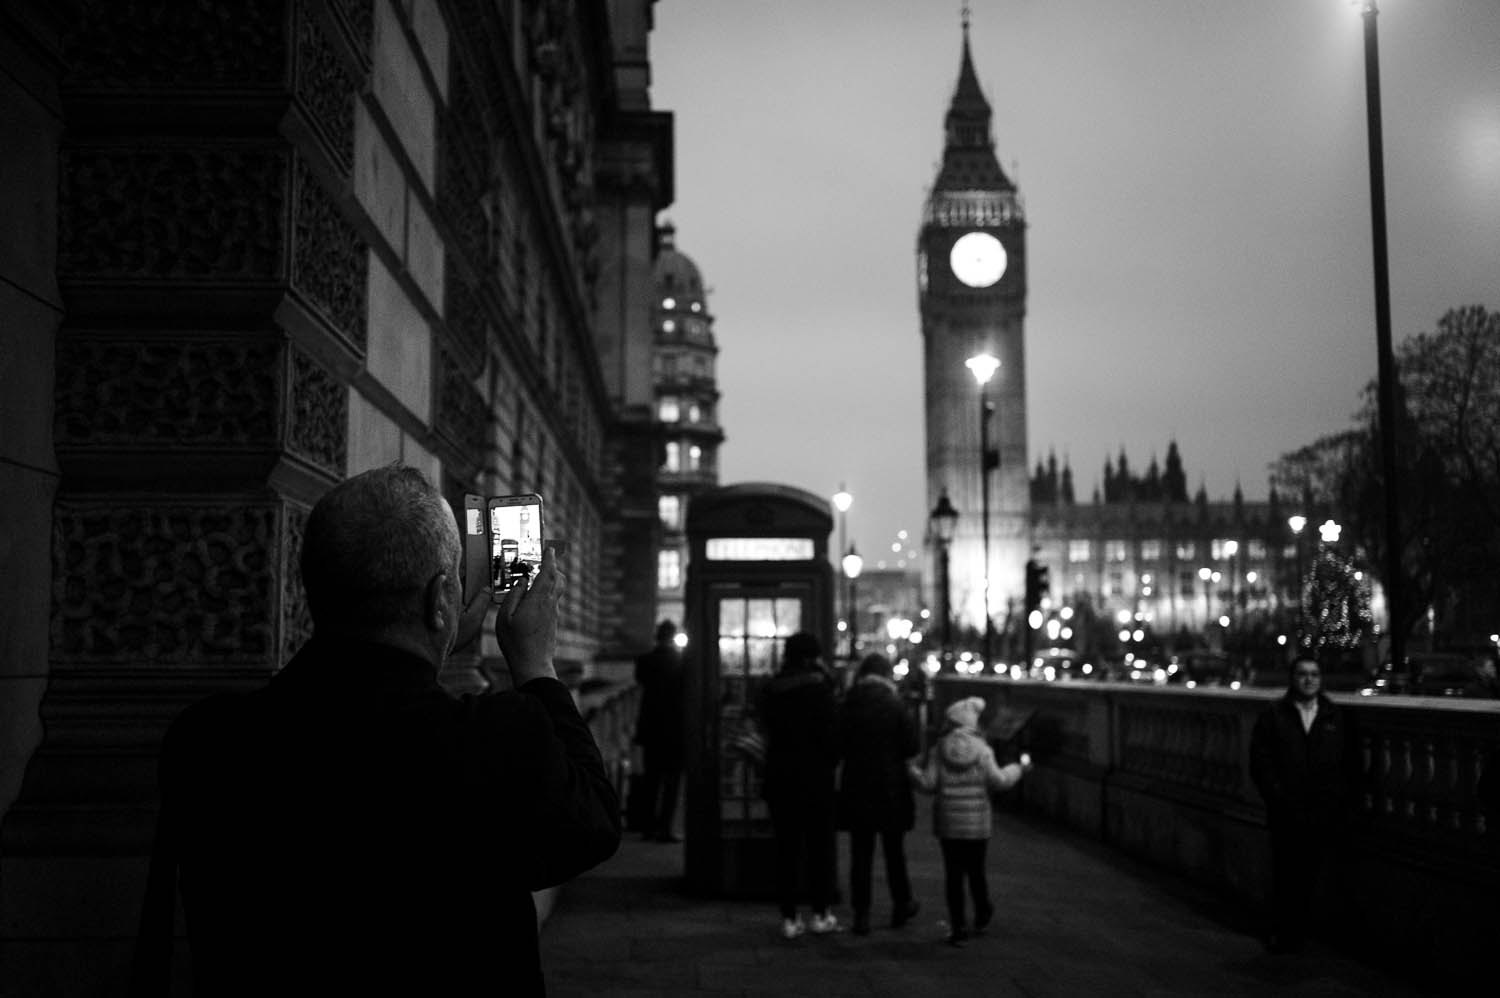 A man photographs Elizabeth Tower with his cell phone in London